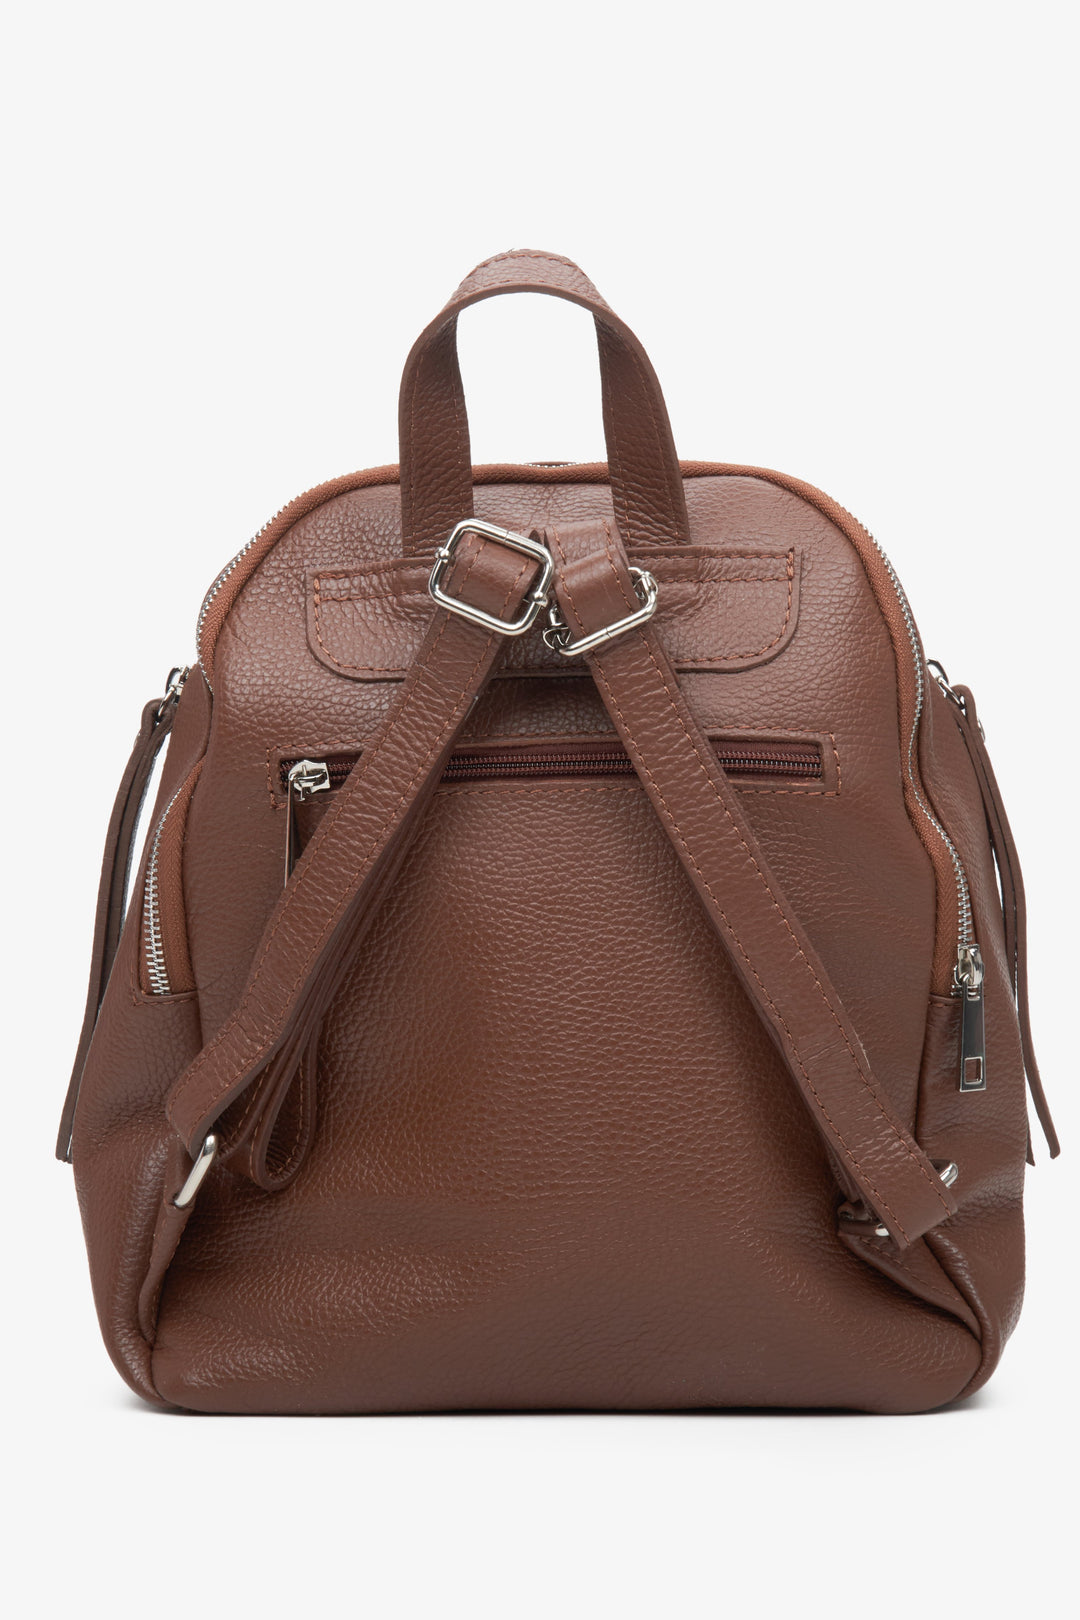 Women's brown leather backpack with silver accents - reverse.